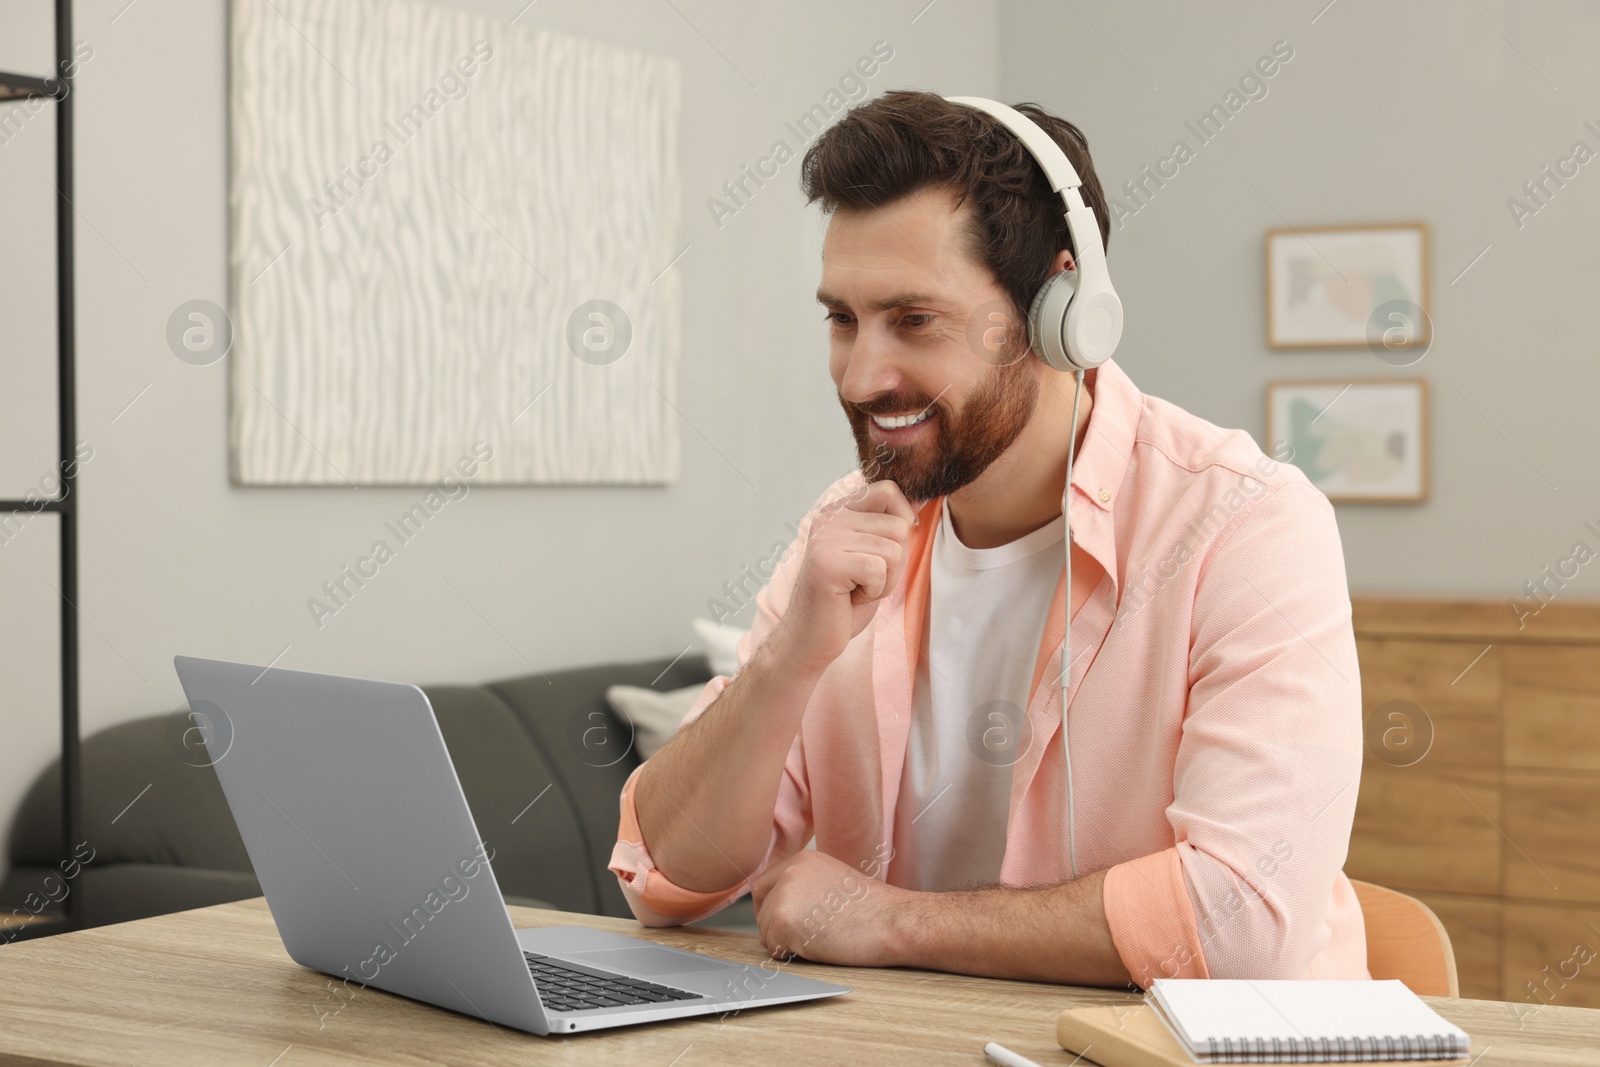 Photo of Man in headphones using laptop at wooden table indoors